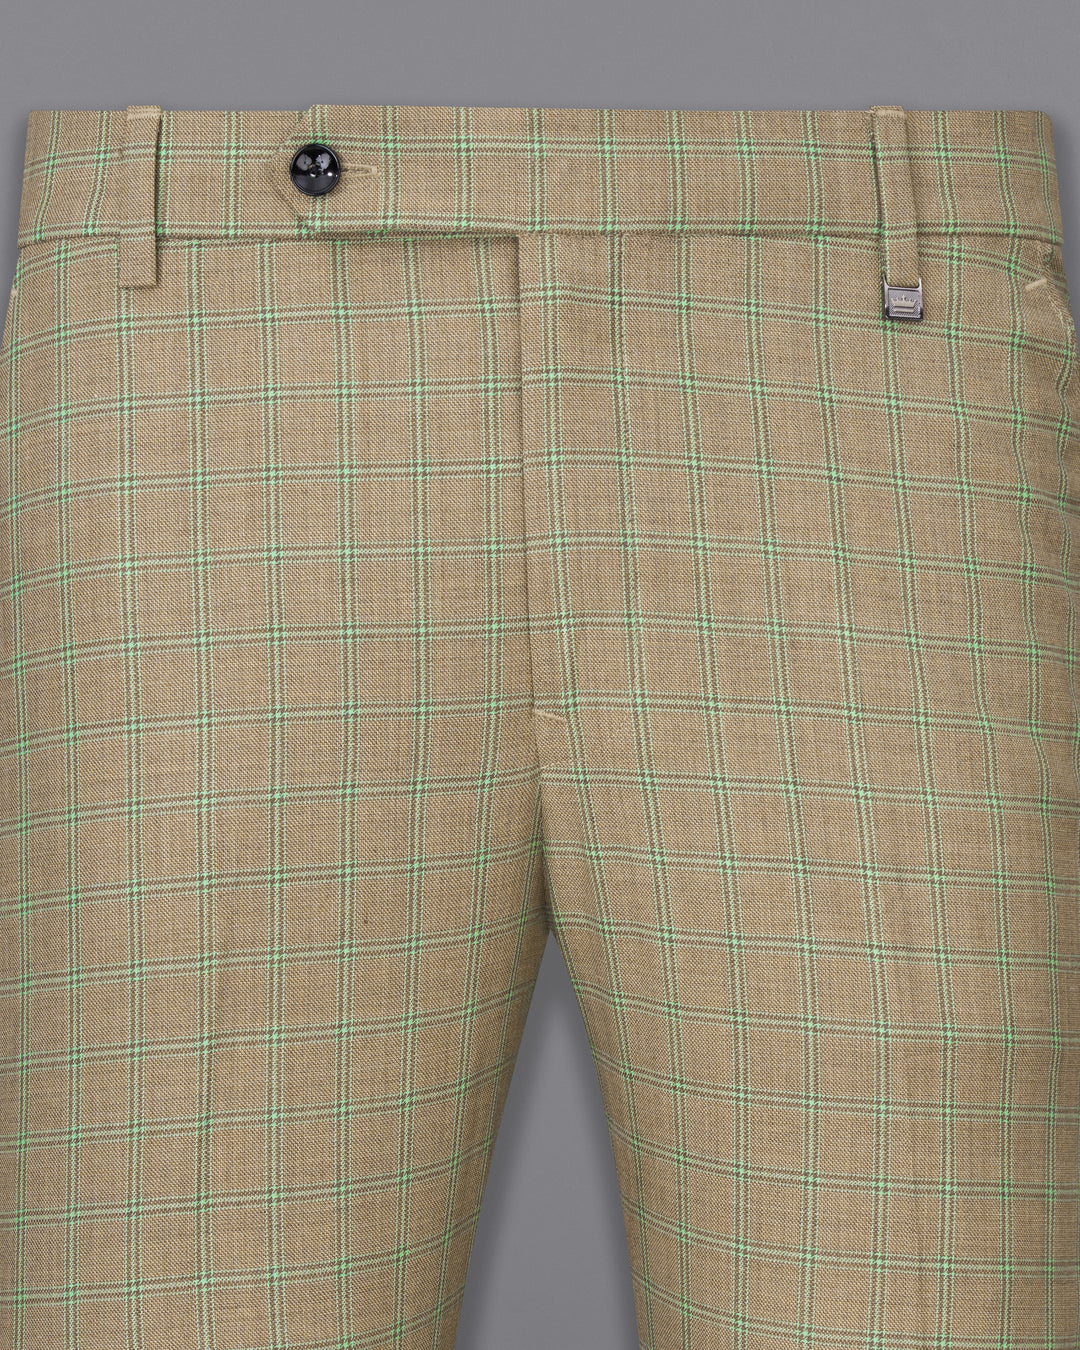 Buy Green and Black Combo of 2 Check Pant with Belt Cotton for Best Price  Reviews Free Shipping